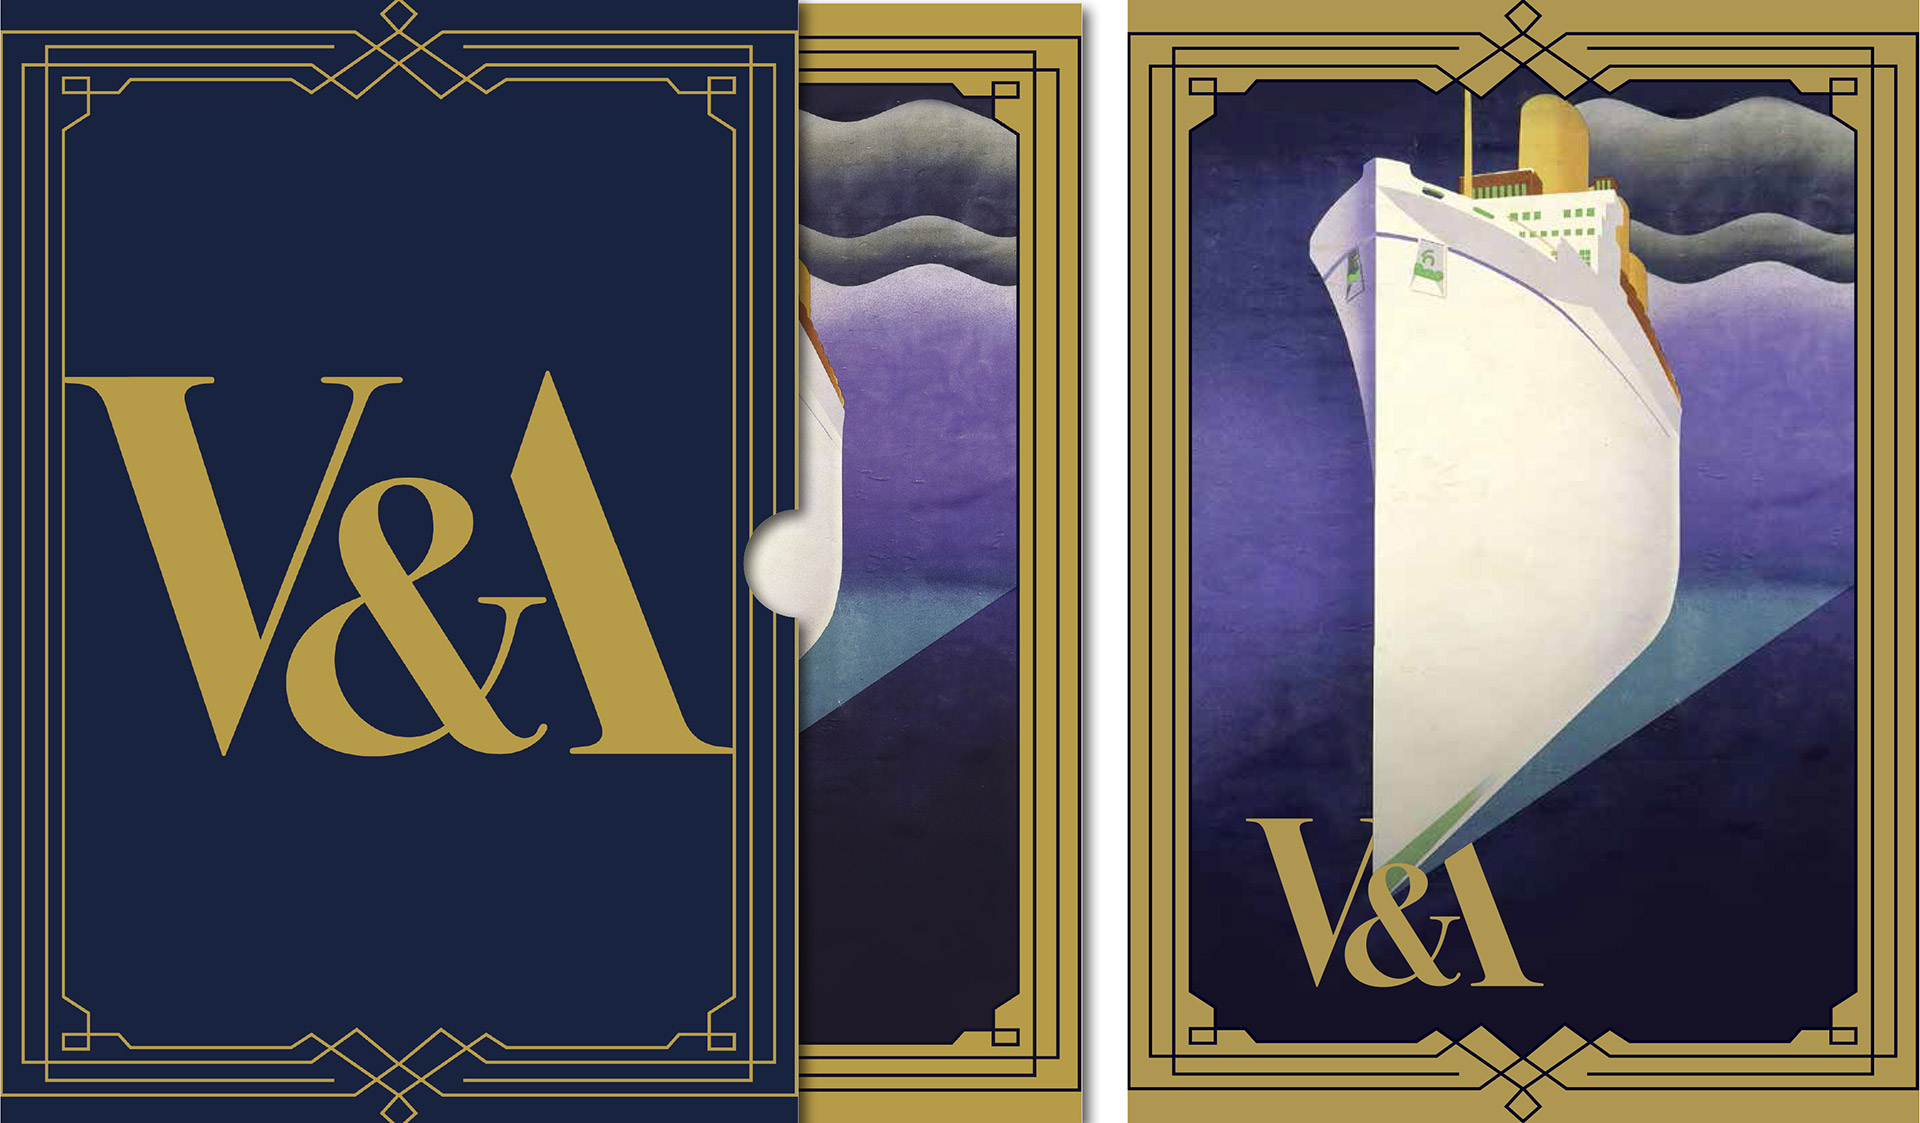 Ocean Liners invitation suite for V&A South Kensington designed by Irish Butcher